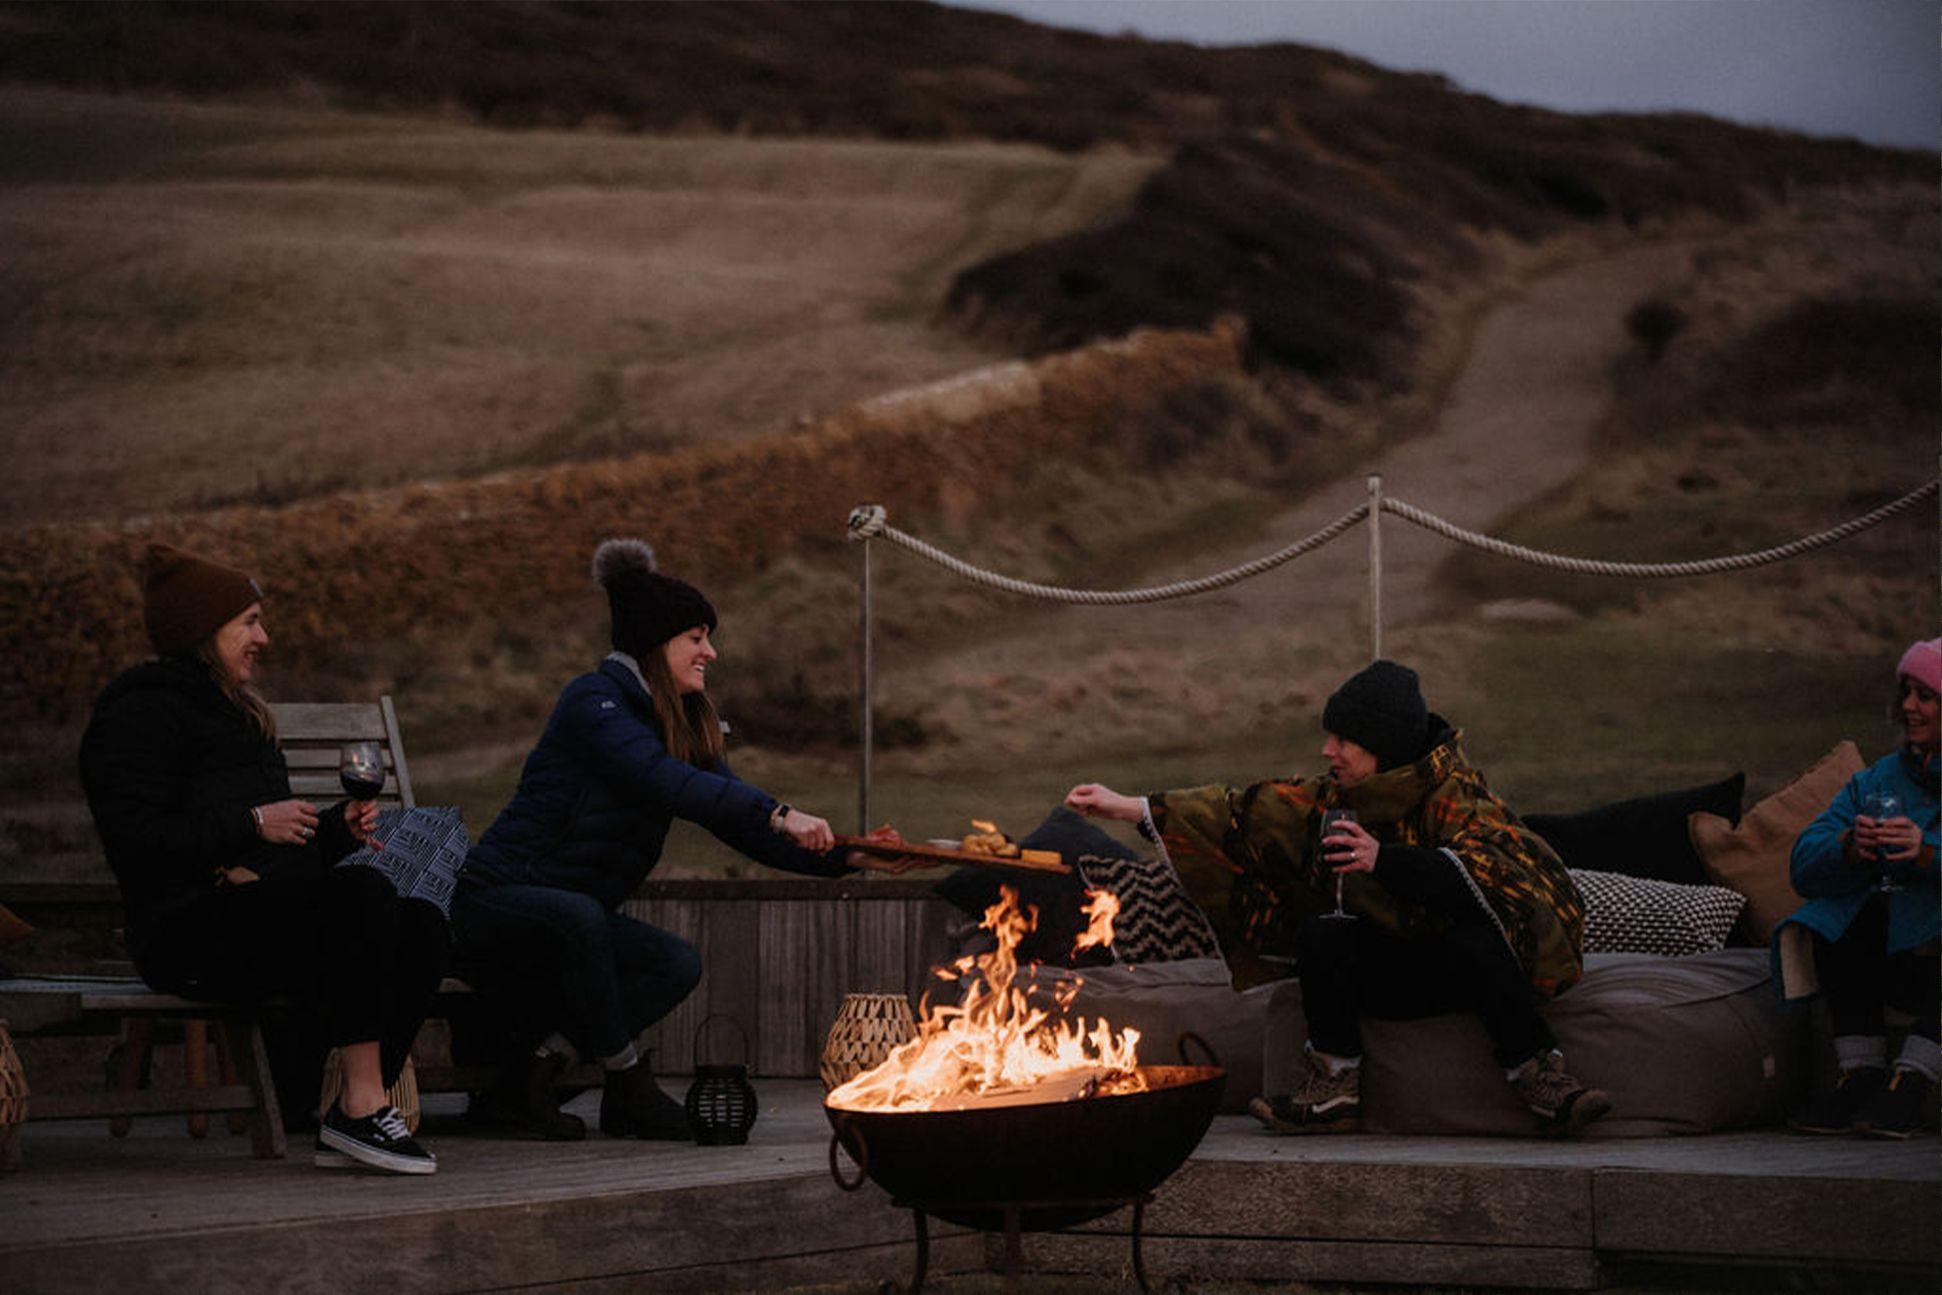 Group around a fire pit on the beach 